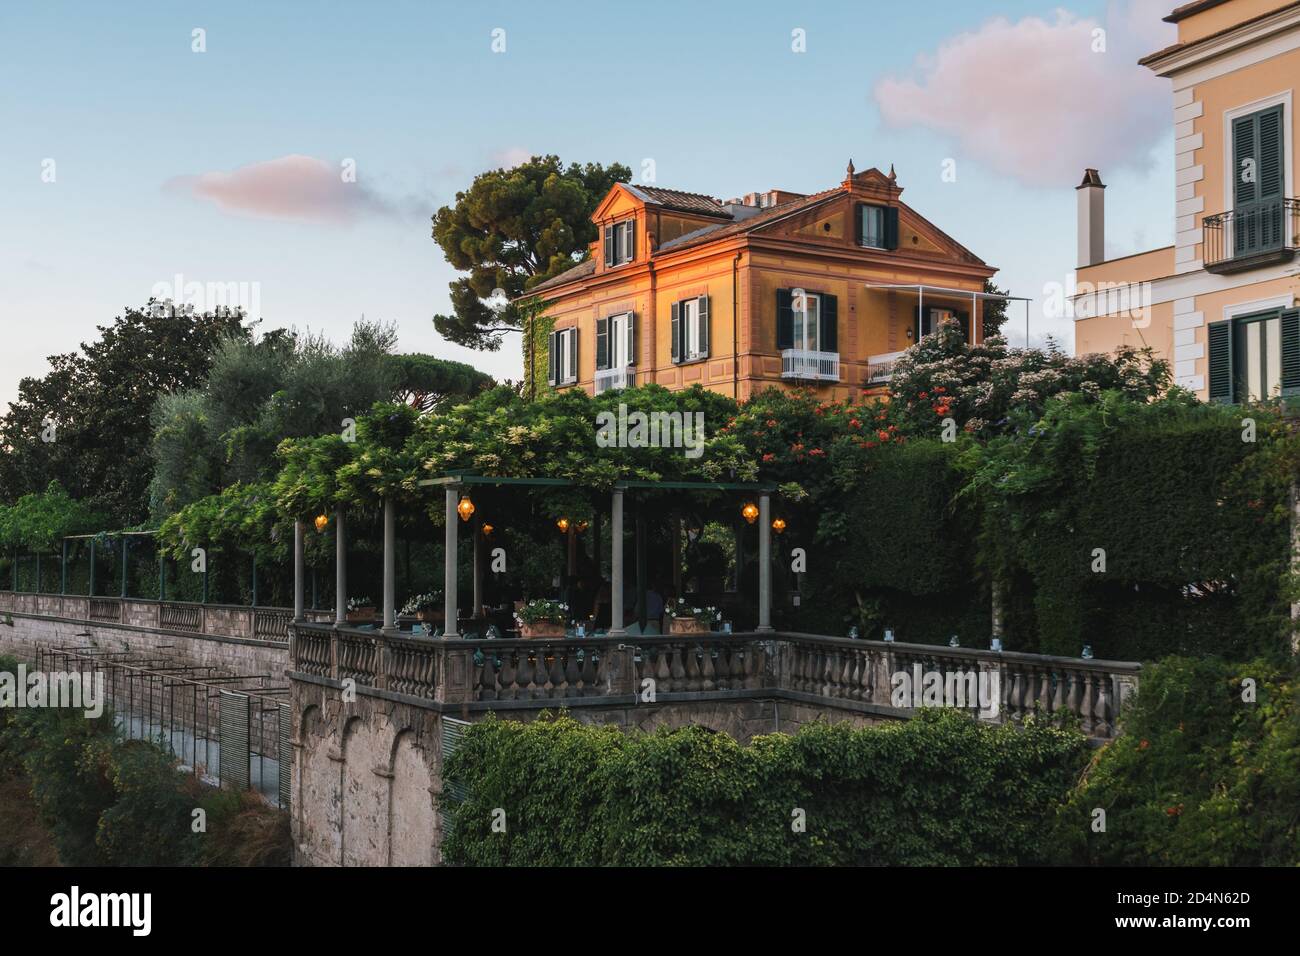 Sorrento. Italy - August 26 2020: Excelsior Vittoria Grand Hotel, Sorrento, Italy, a Leading Hotel of the World on a Cliff in the Evening Stock Photo